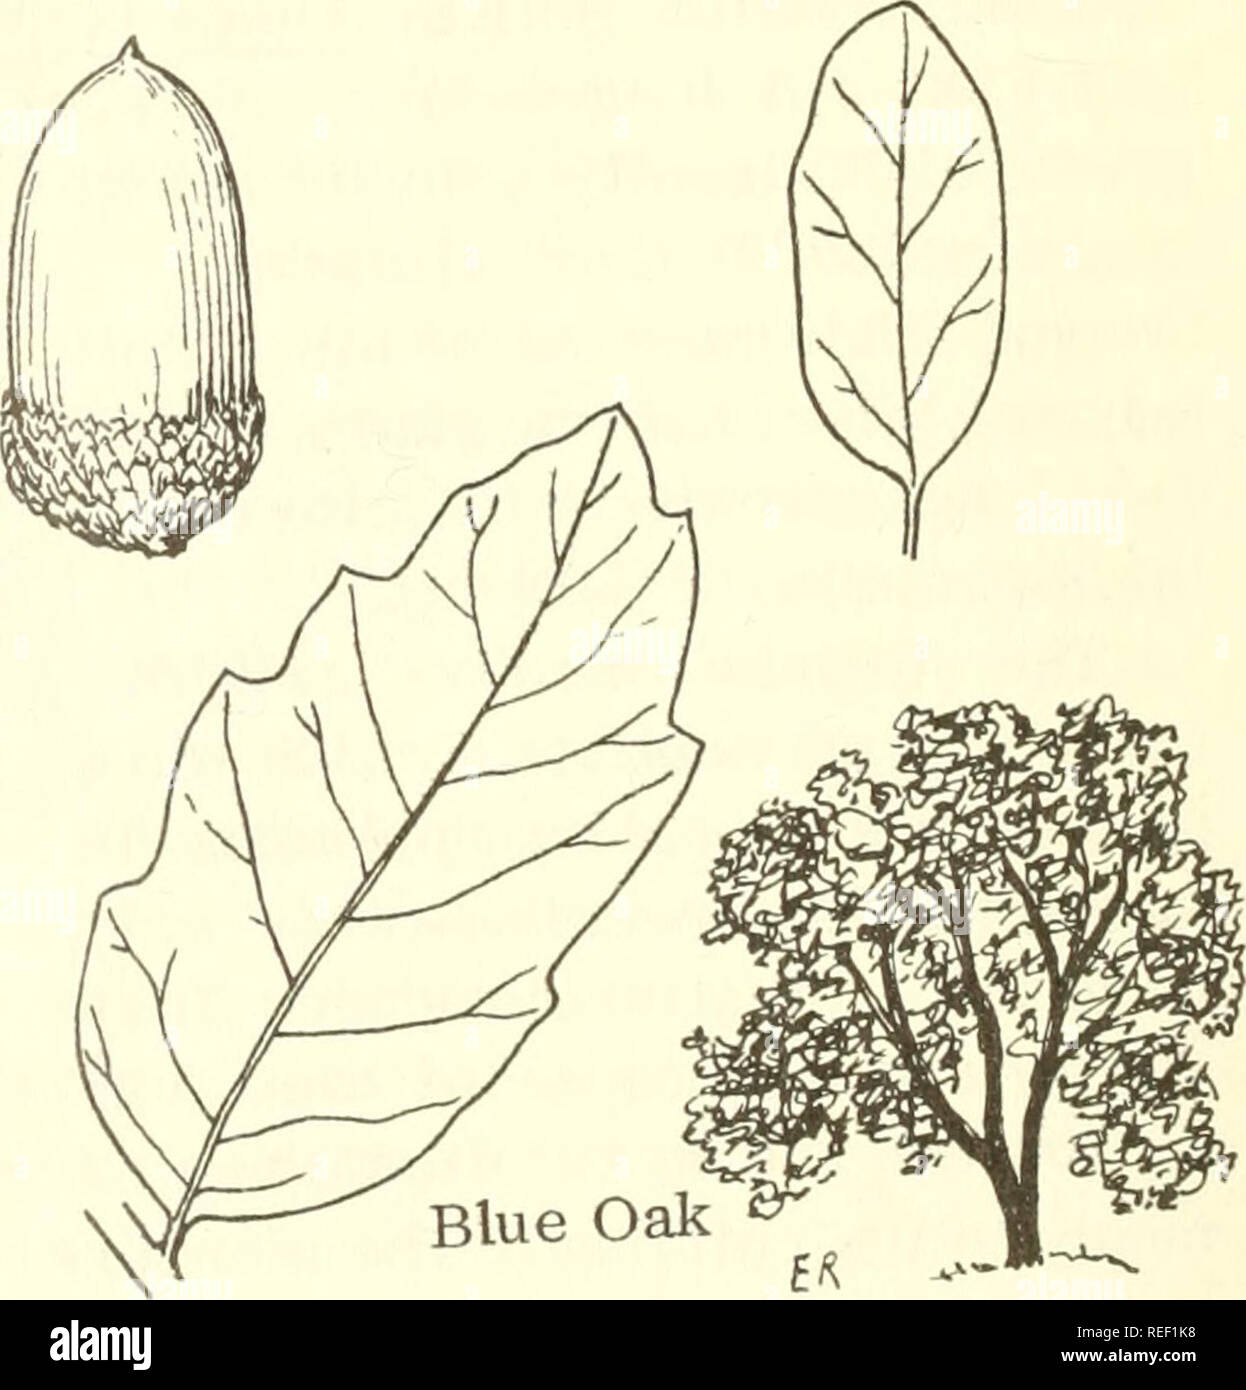 . Common edible and useful plants of the West. Plants, Edible -- West (U. S. ); Botany, Economic; Botany -- West (U. S. ). T-9. WHITE ALDER, Alnus rhombifolia, Birch Fam. Also other species of Alnus. A tree 15'-30' high, with light green leaves, whitish to gray bark, green hanging catkins, and small, brown, 2&quot;-4&quot; long cones; very common along streams. Parkinson, in 1640, writes of Al- nus: &quot;Leaves and bark are cooling and drying. Fresh leaves laid on tu- '^//^^^ mors will dissolve them; also stays inflammation. Leaves with morning dew on them; laid on a floor troubled with fleas Stock Photo